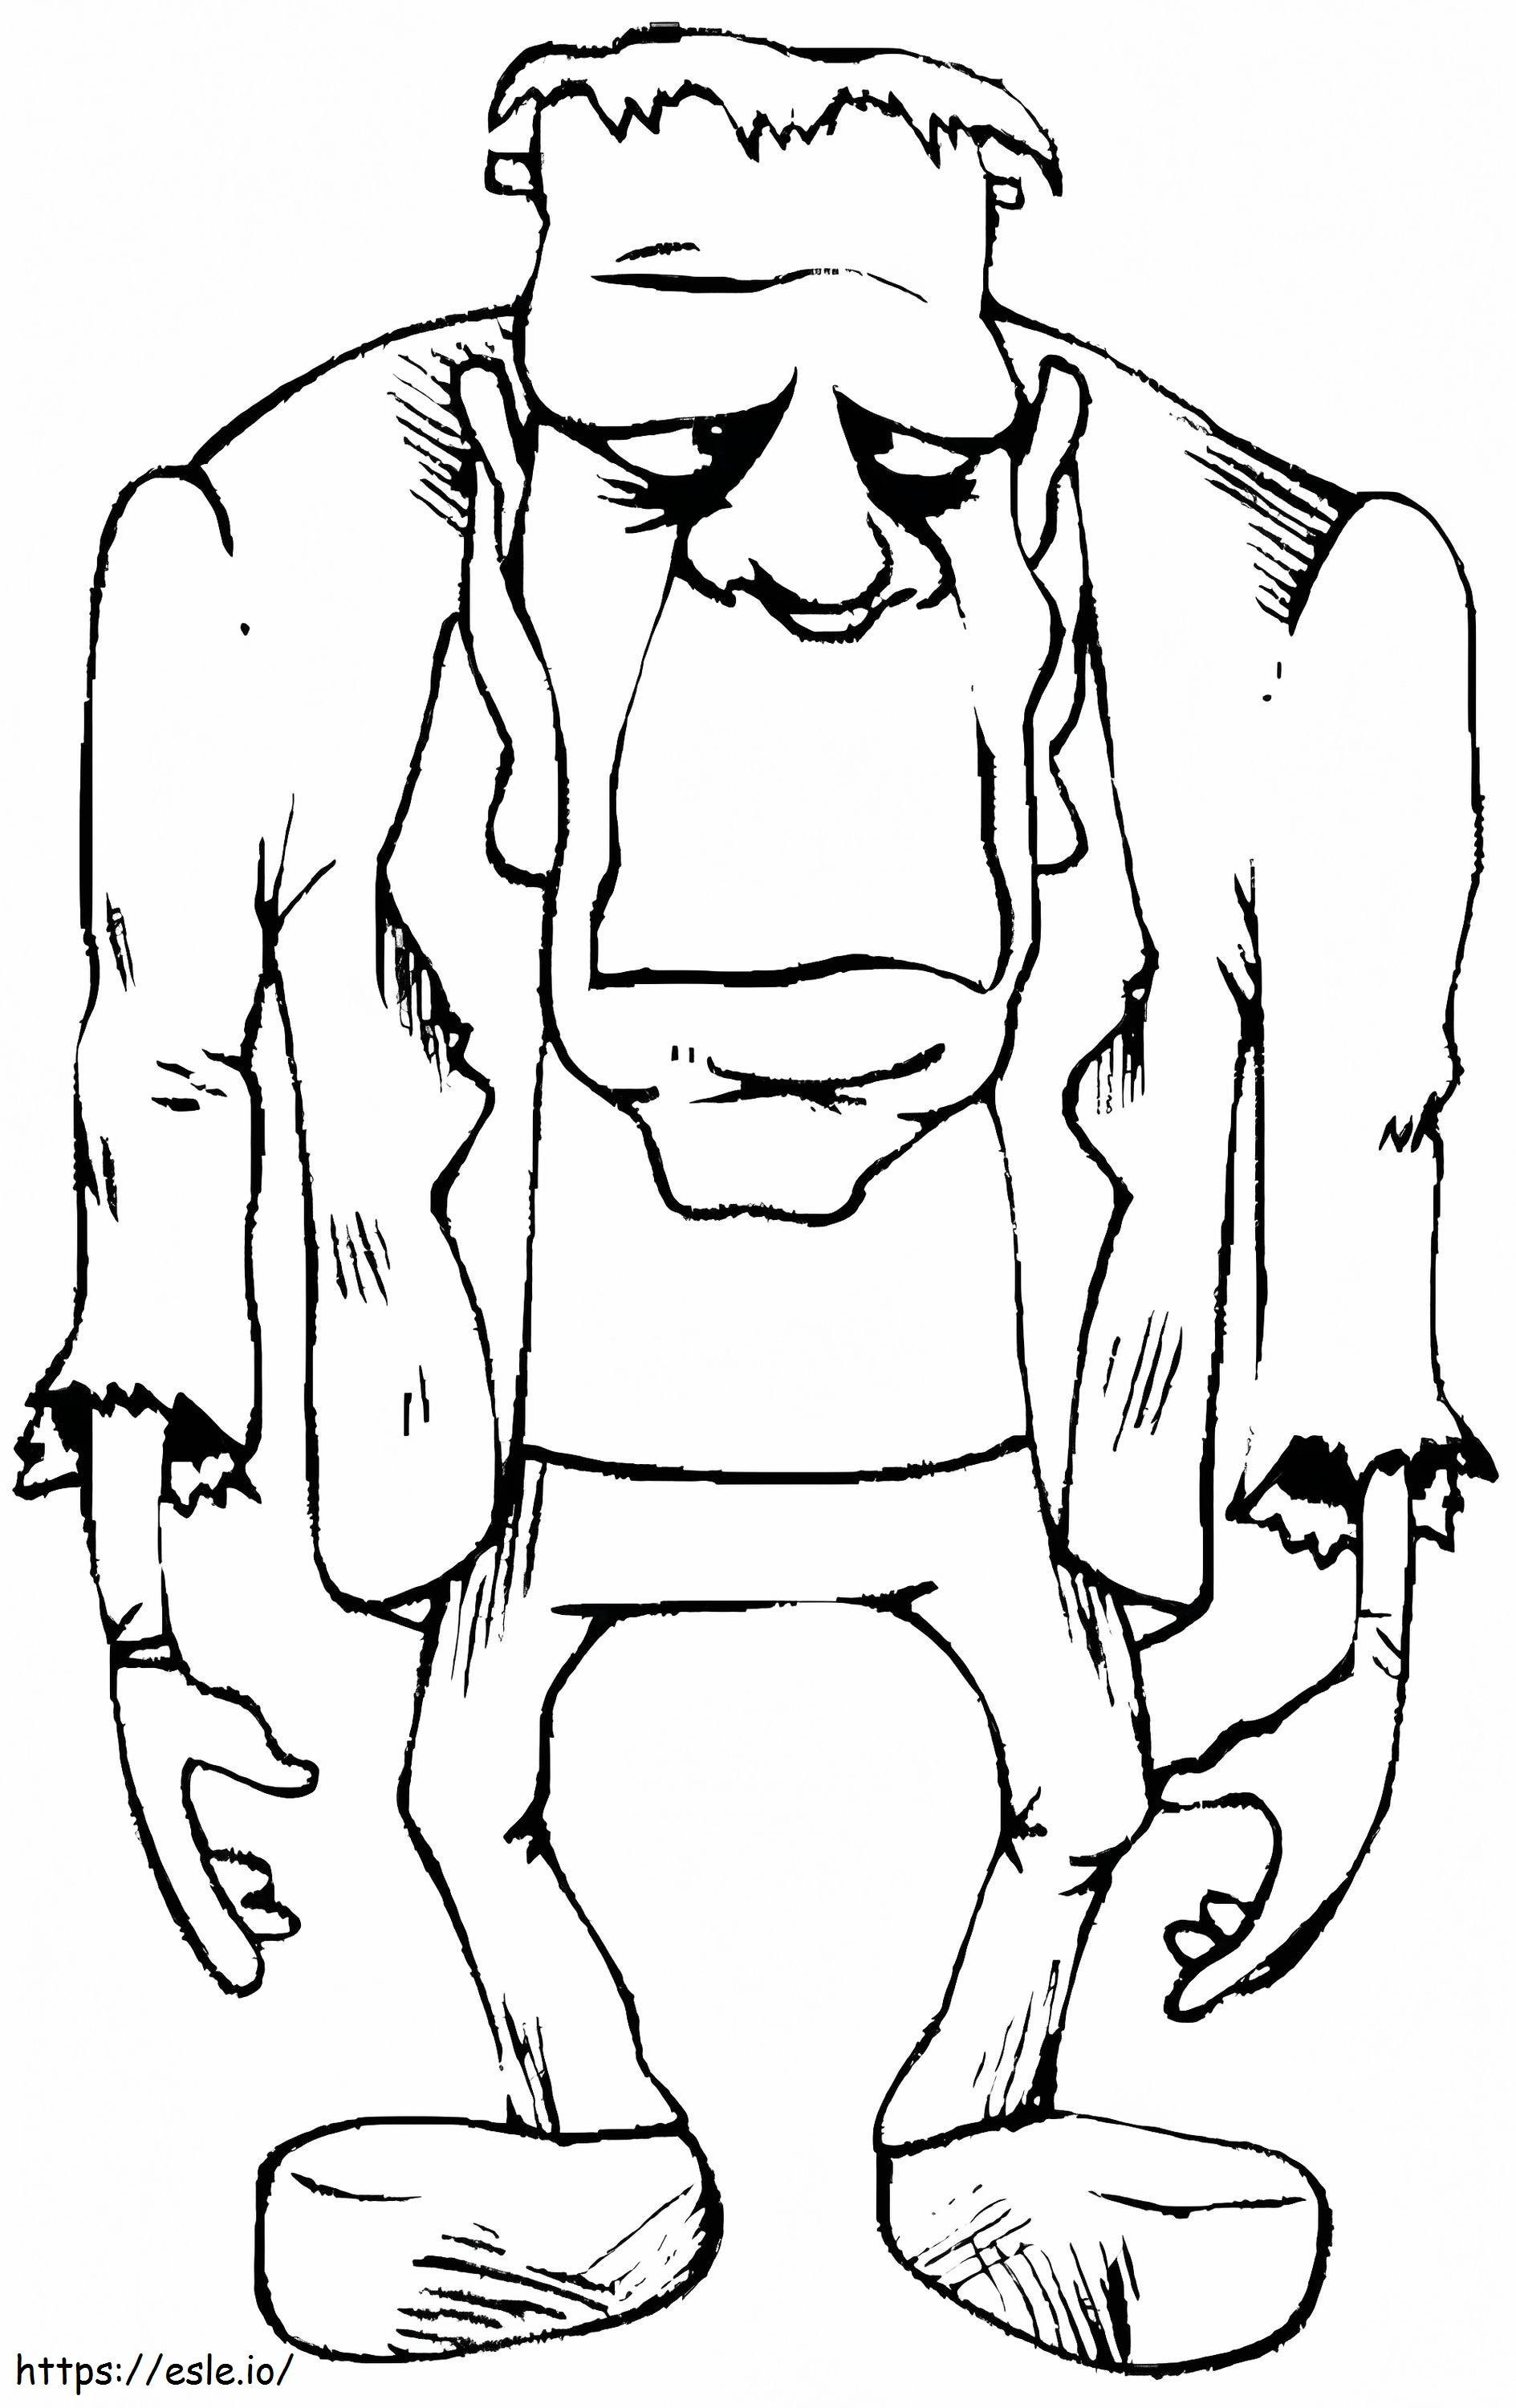 1539677963 To Print Page Zombie Halloween Frankenstein Scary Pag coloring page